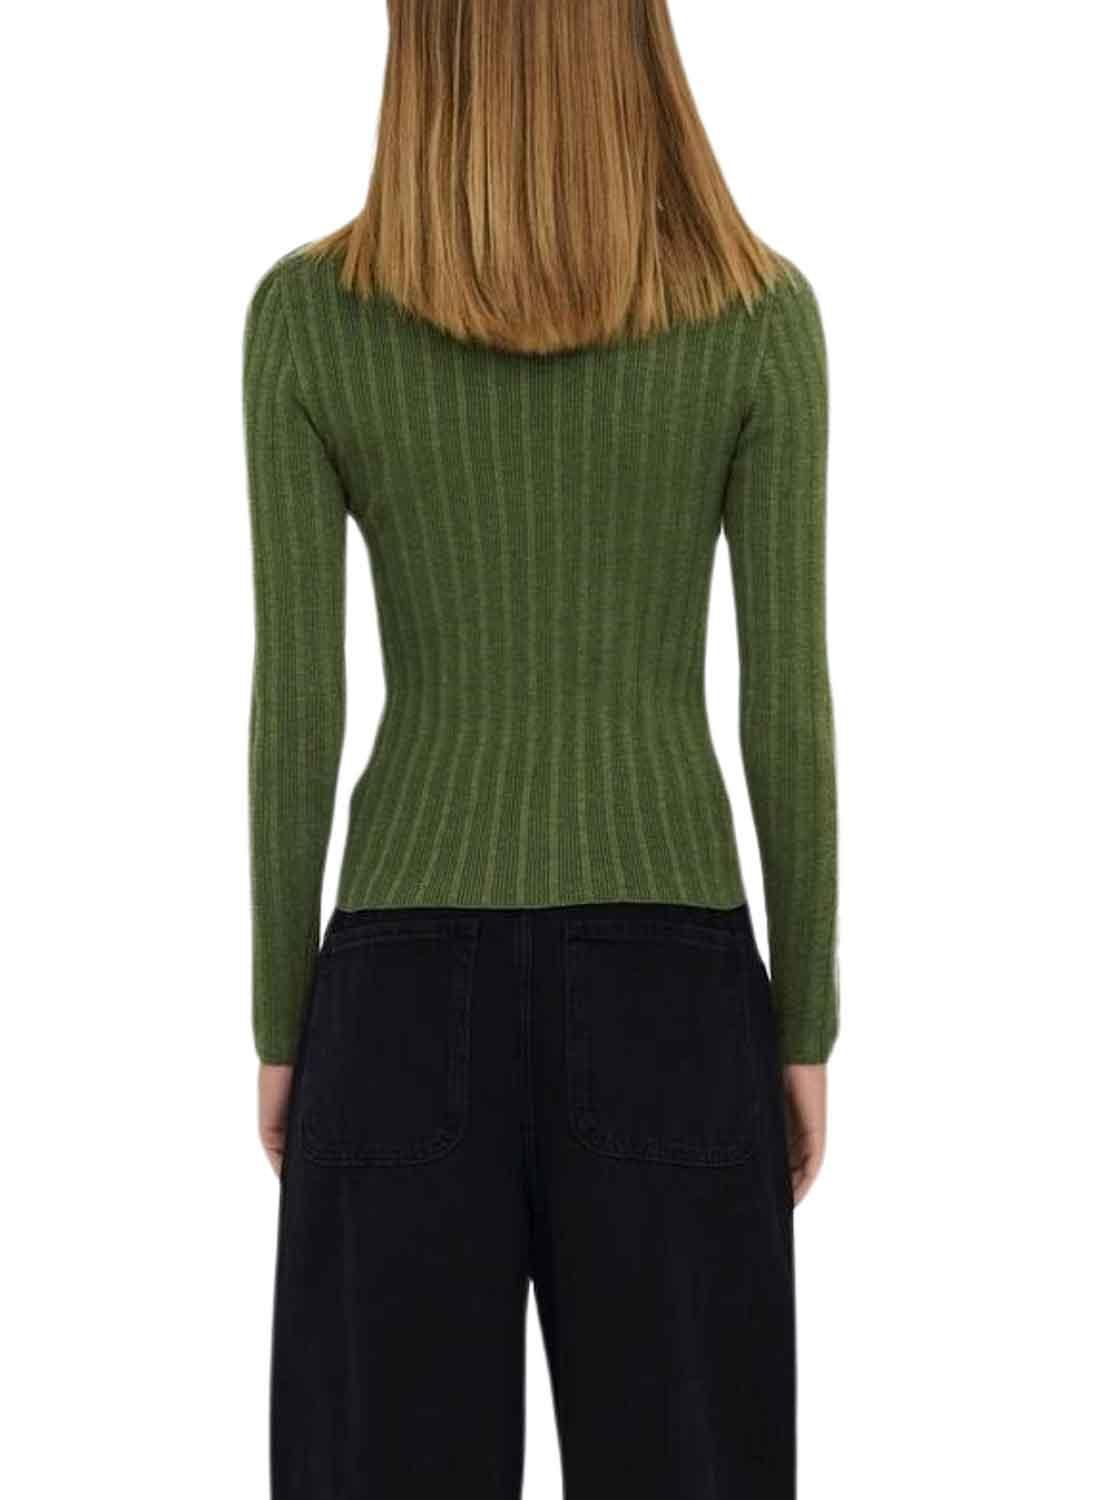 Pullover Only Dima Life Pulsante Verde Oscuro Donna